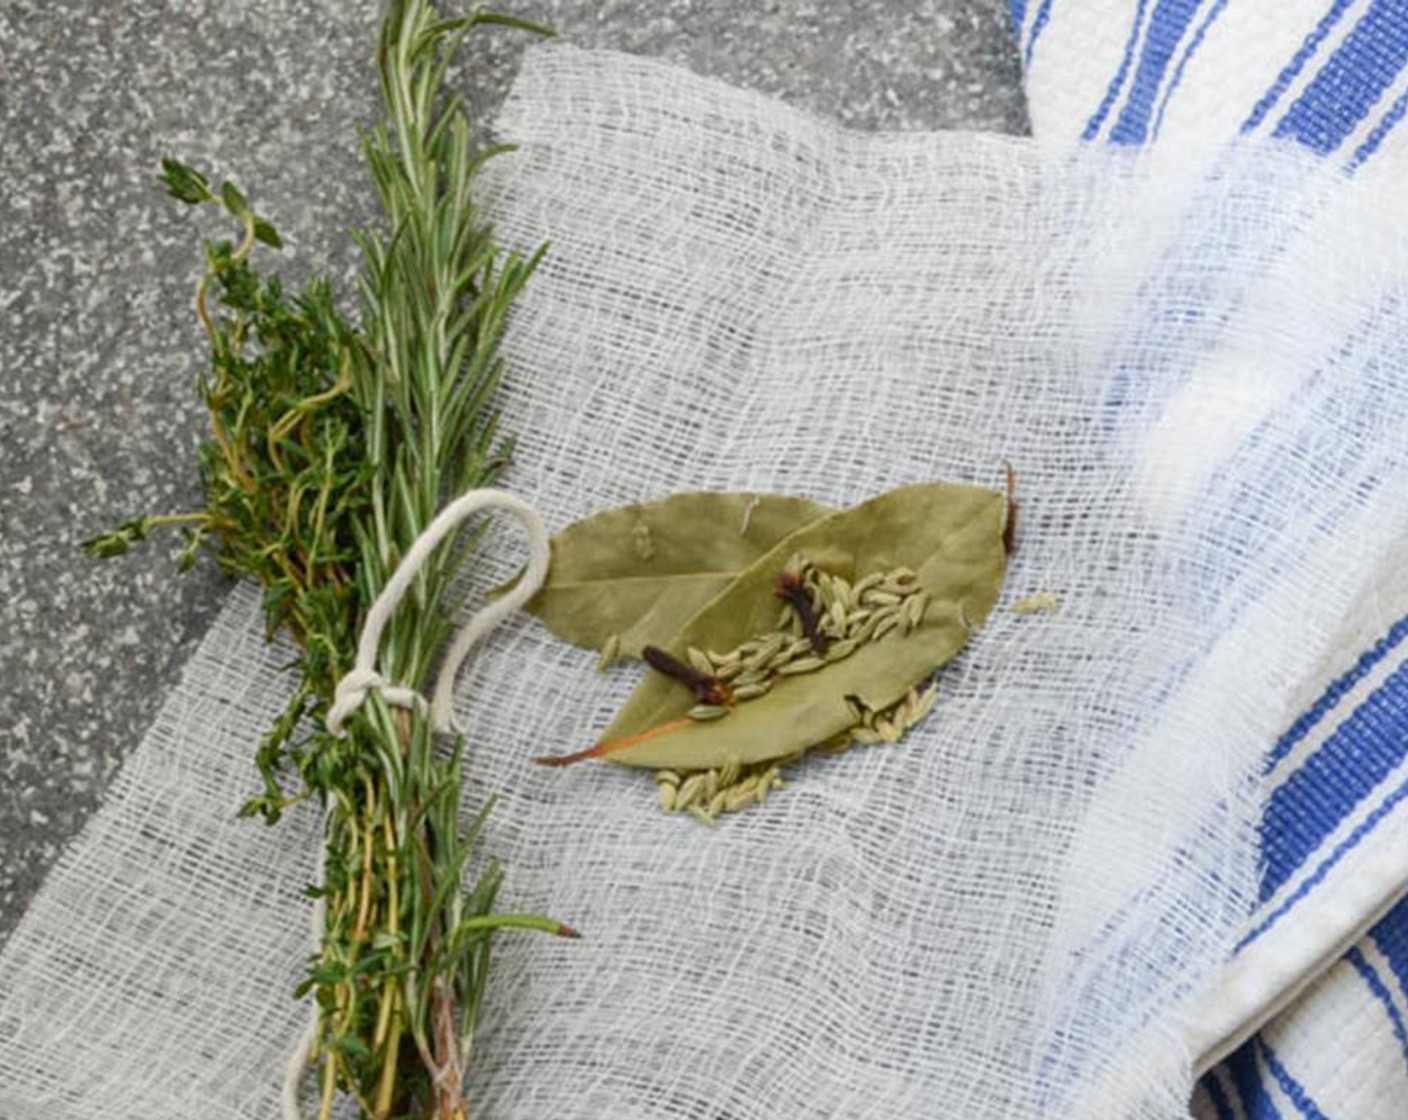 step 1 Preheat oven to 325 degrees F (160 degrees C). Place Whole Cloves (2), Bay Leaves (2) and Fennel Seeds (1 tsp) on a piece of cheese cloth. Tie into a little pouch with a piece of kitchen string. Tie Fresh Thyme (4 sprigs) and fresh Fresh Rosemary (1 sprig) with a piece of kitchen string too. Set aside.